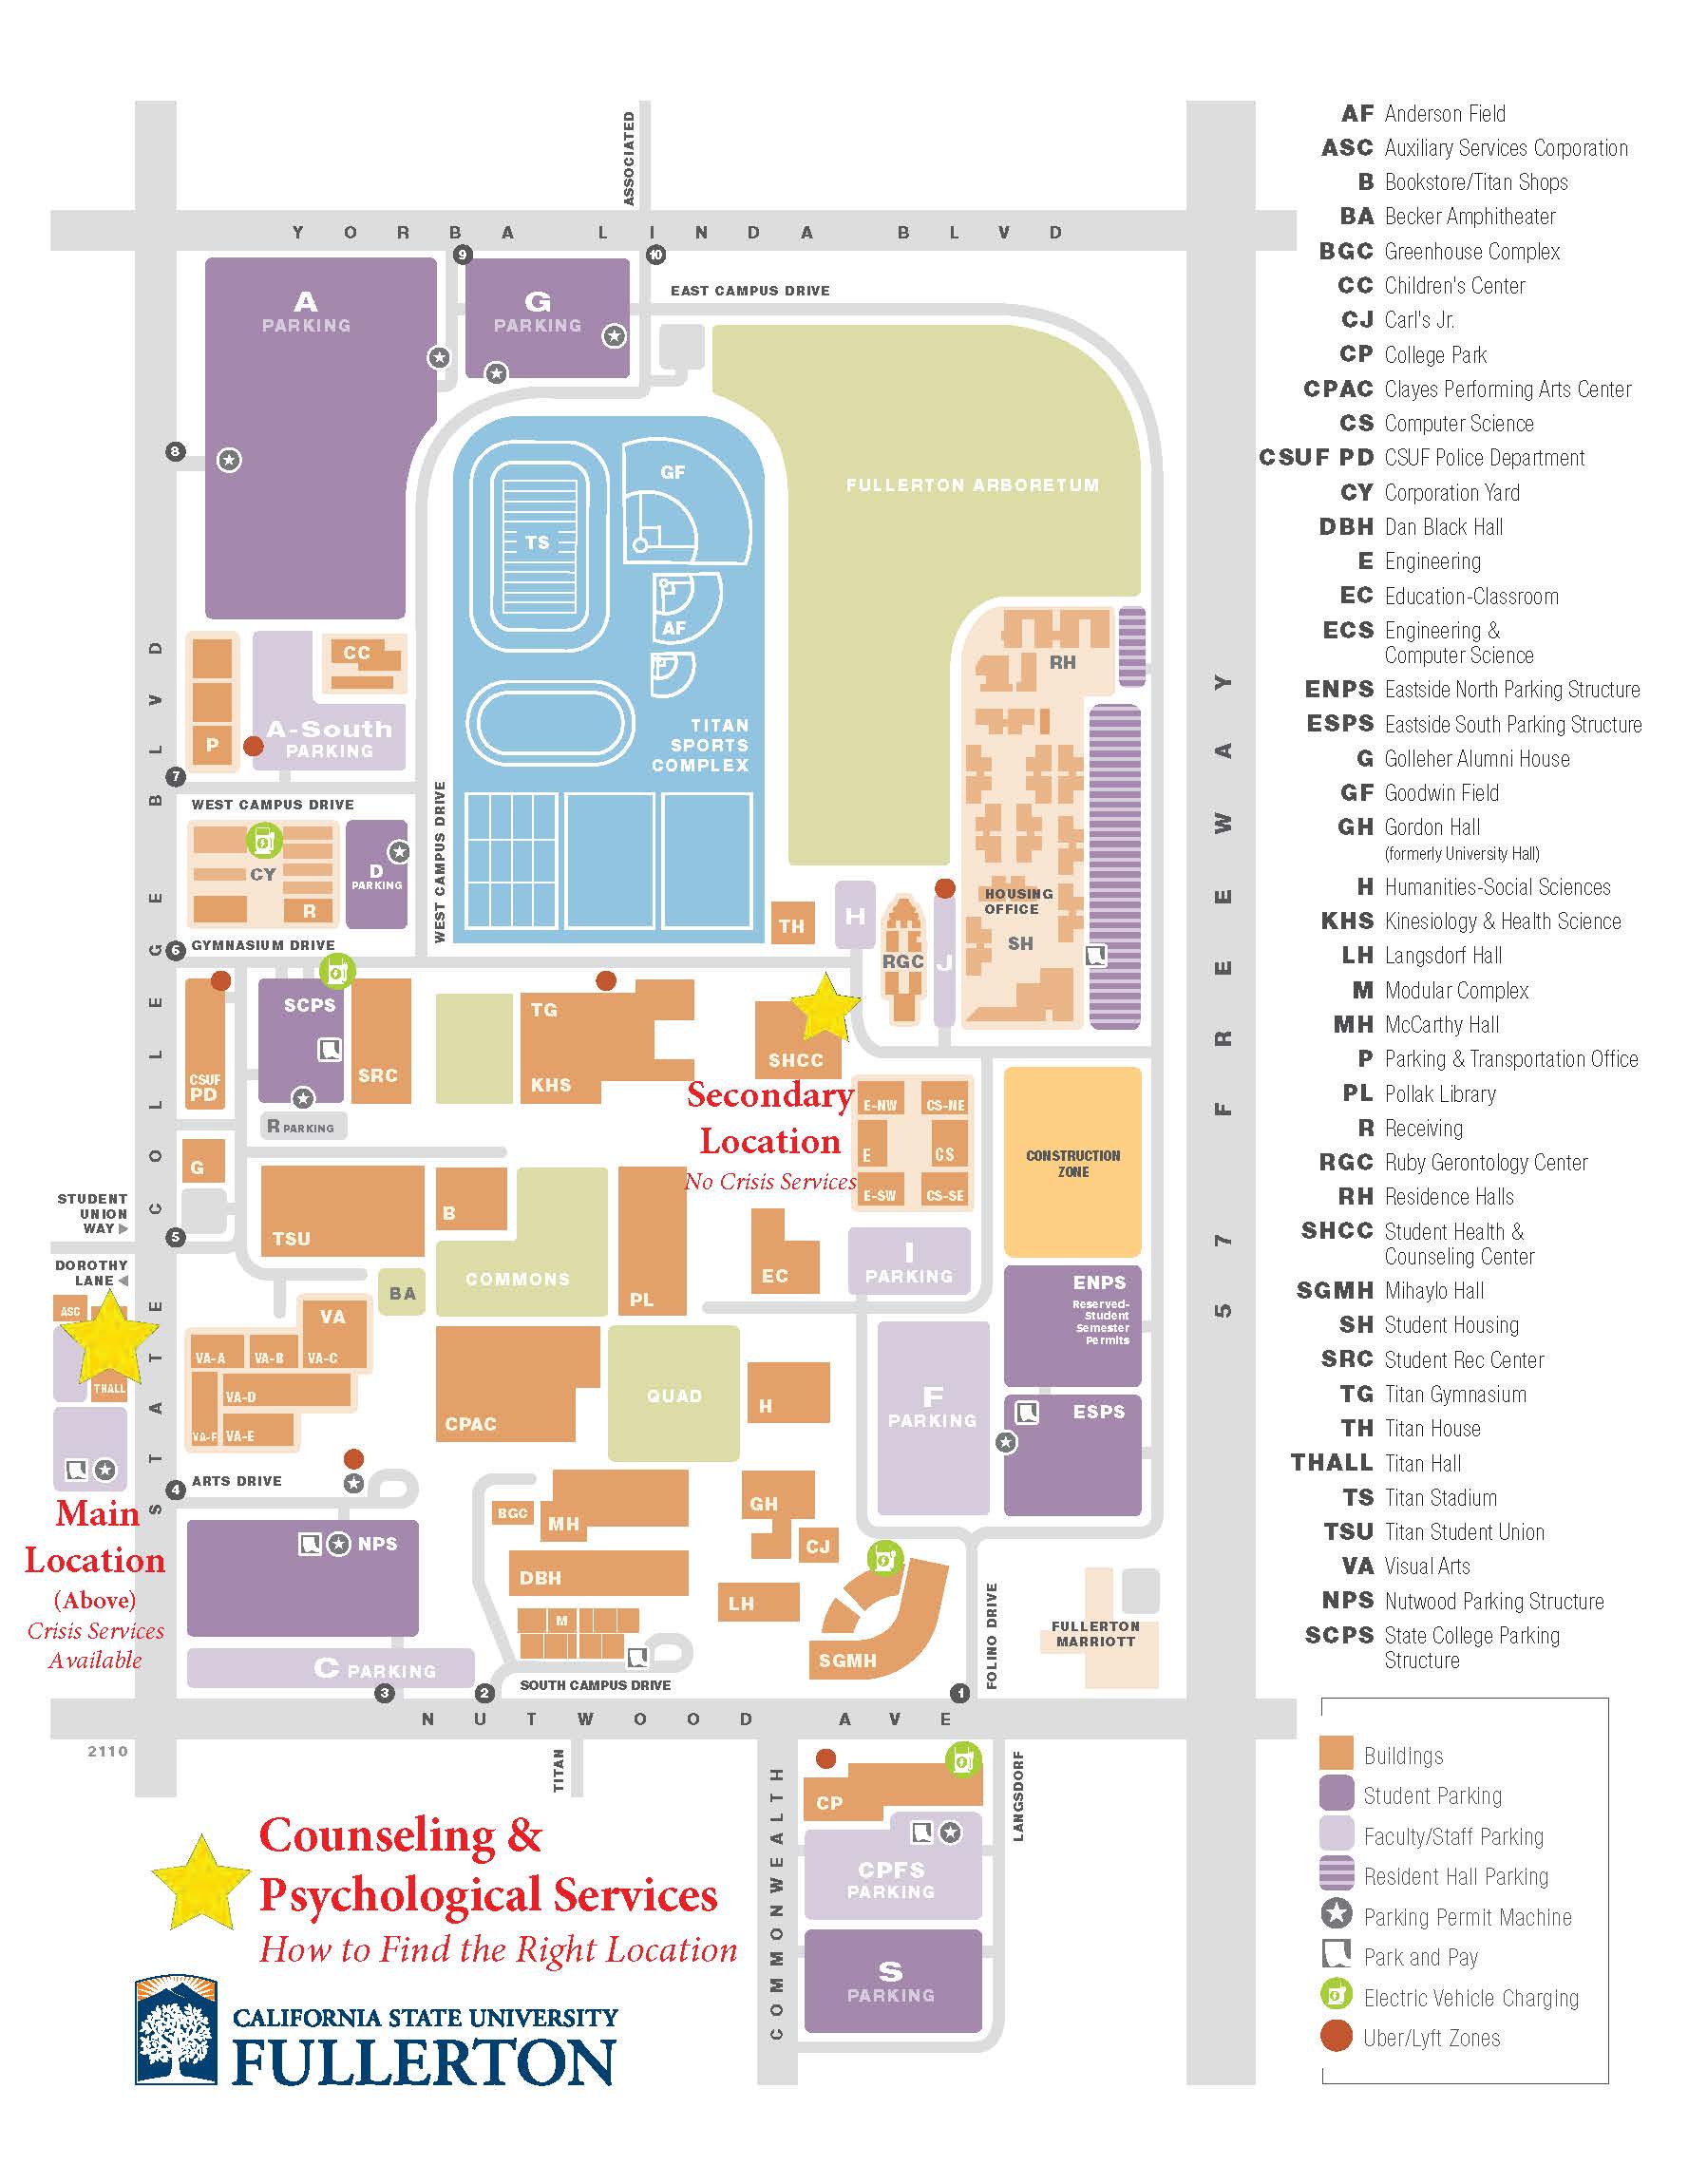 CSUF Campus Map with CAPS Locations Marked by a Star